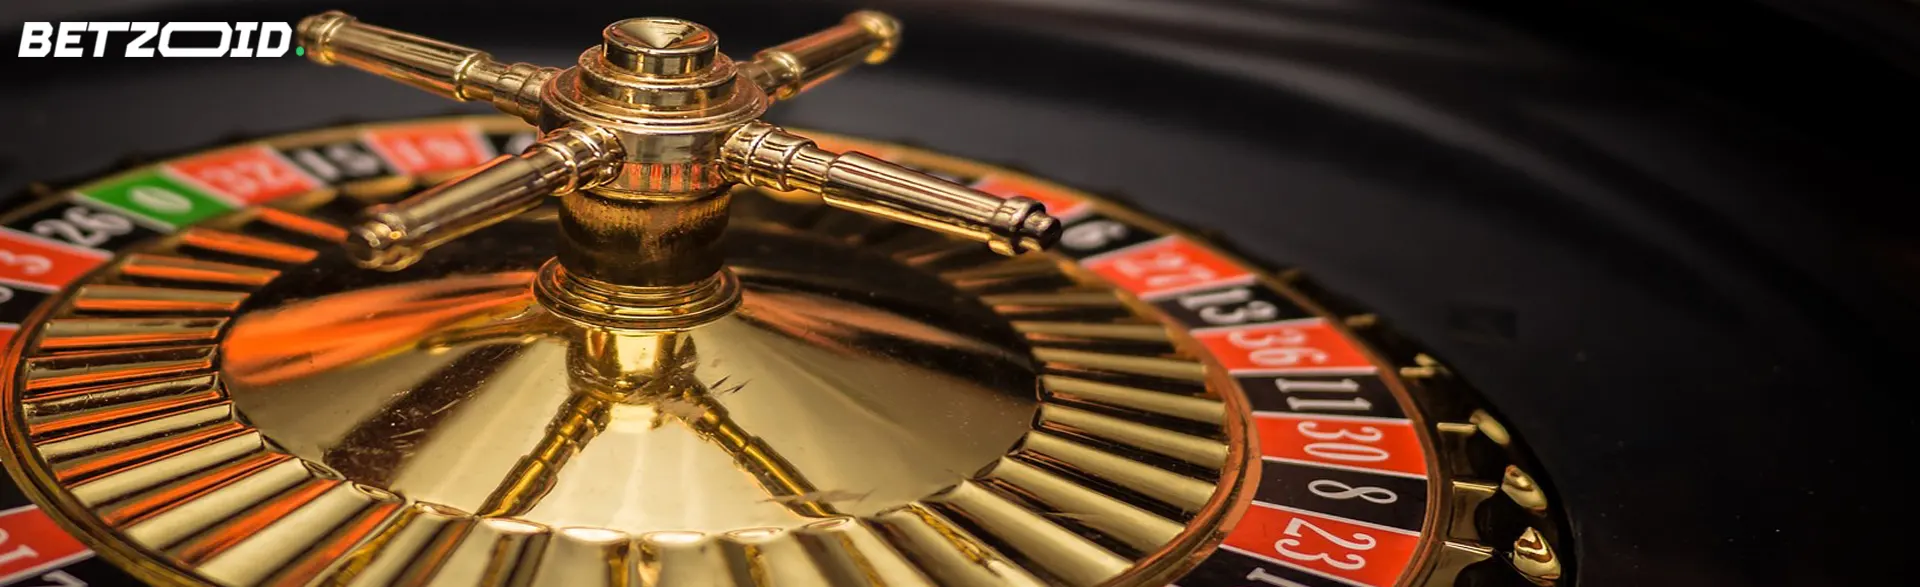 Roulette wheel close-up, epitomizing the atmosphere of high limit betting sites.